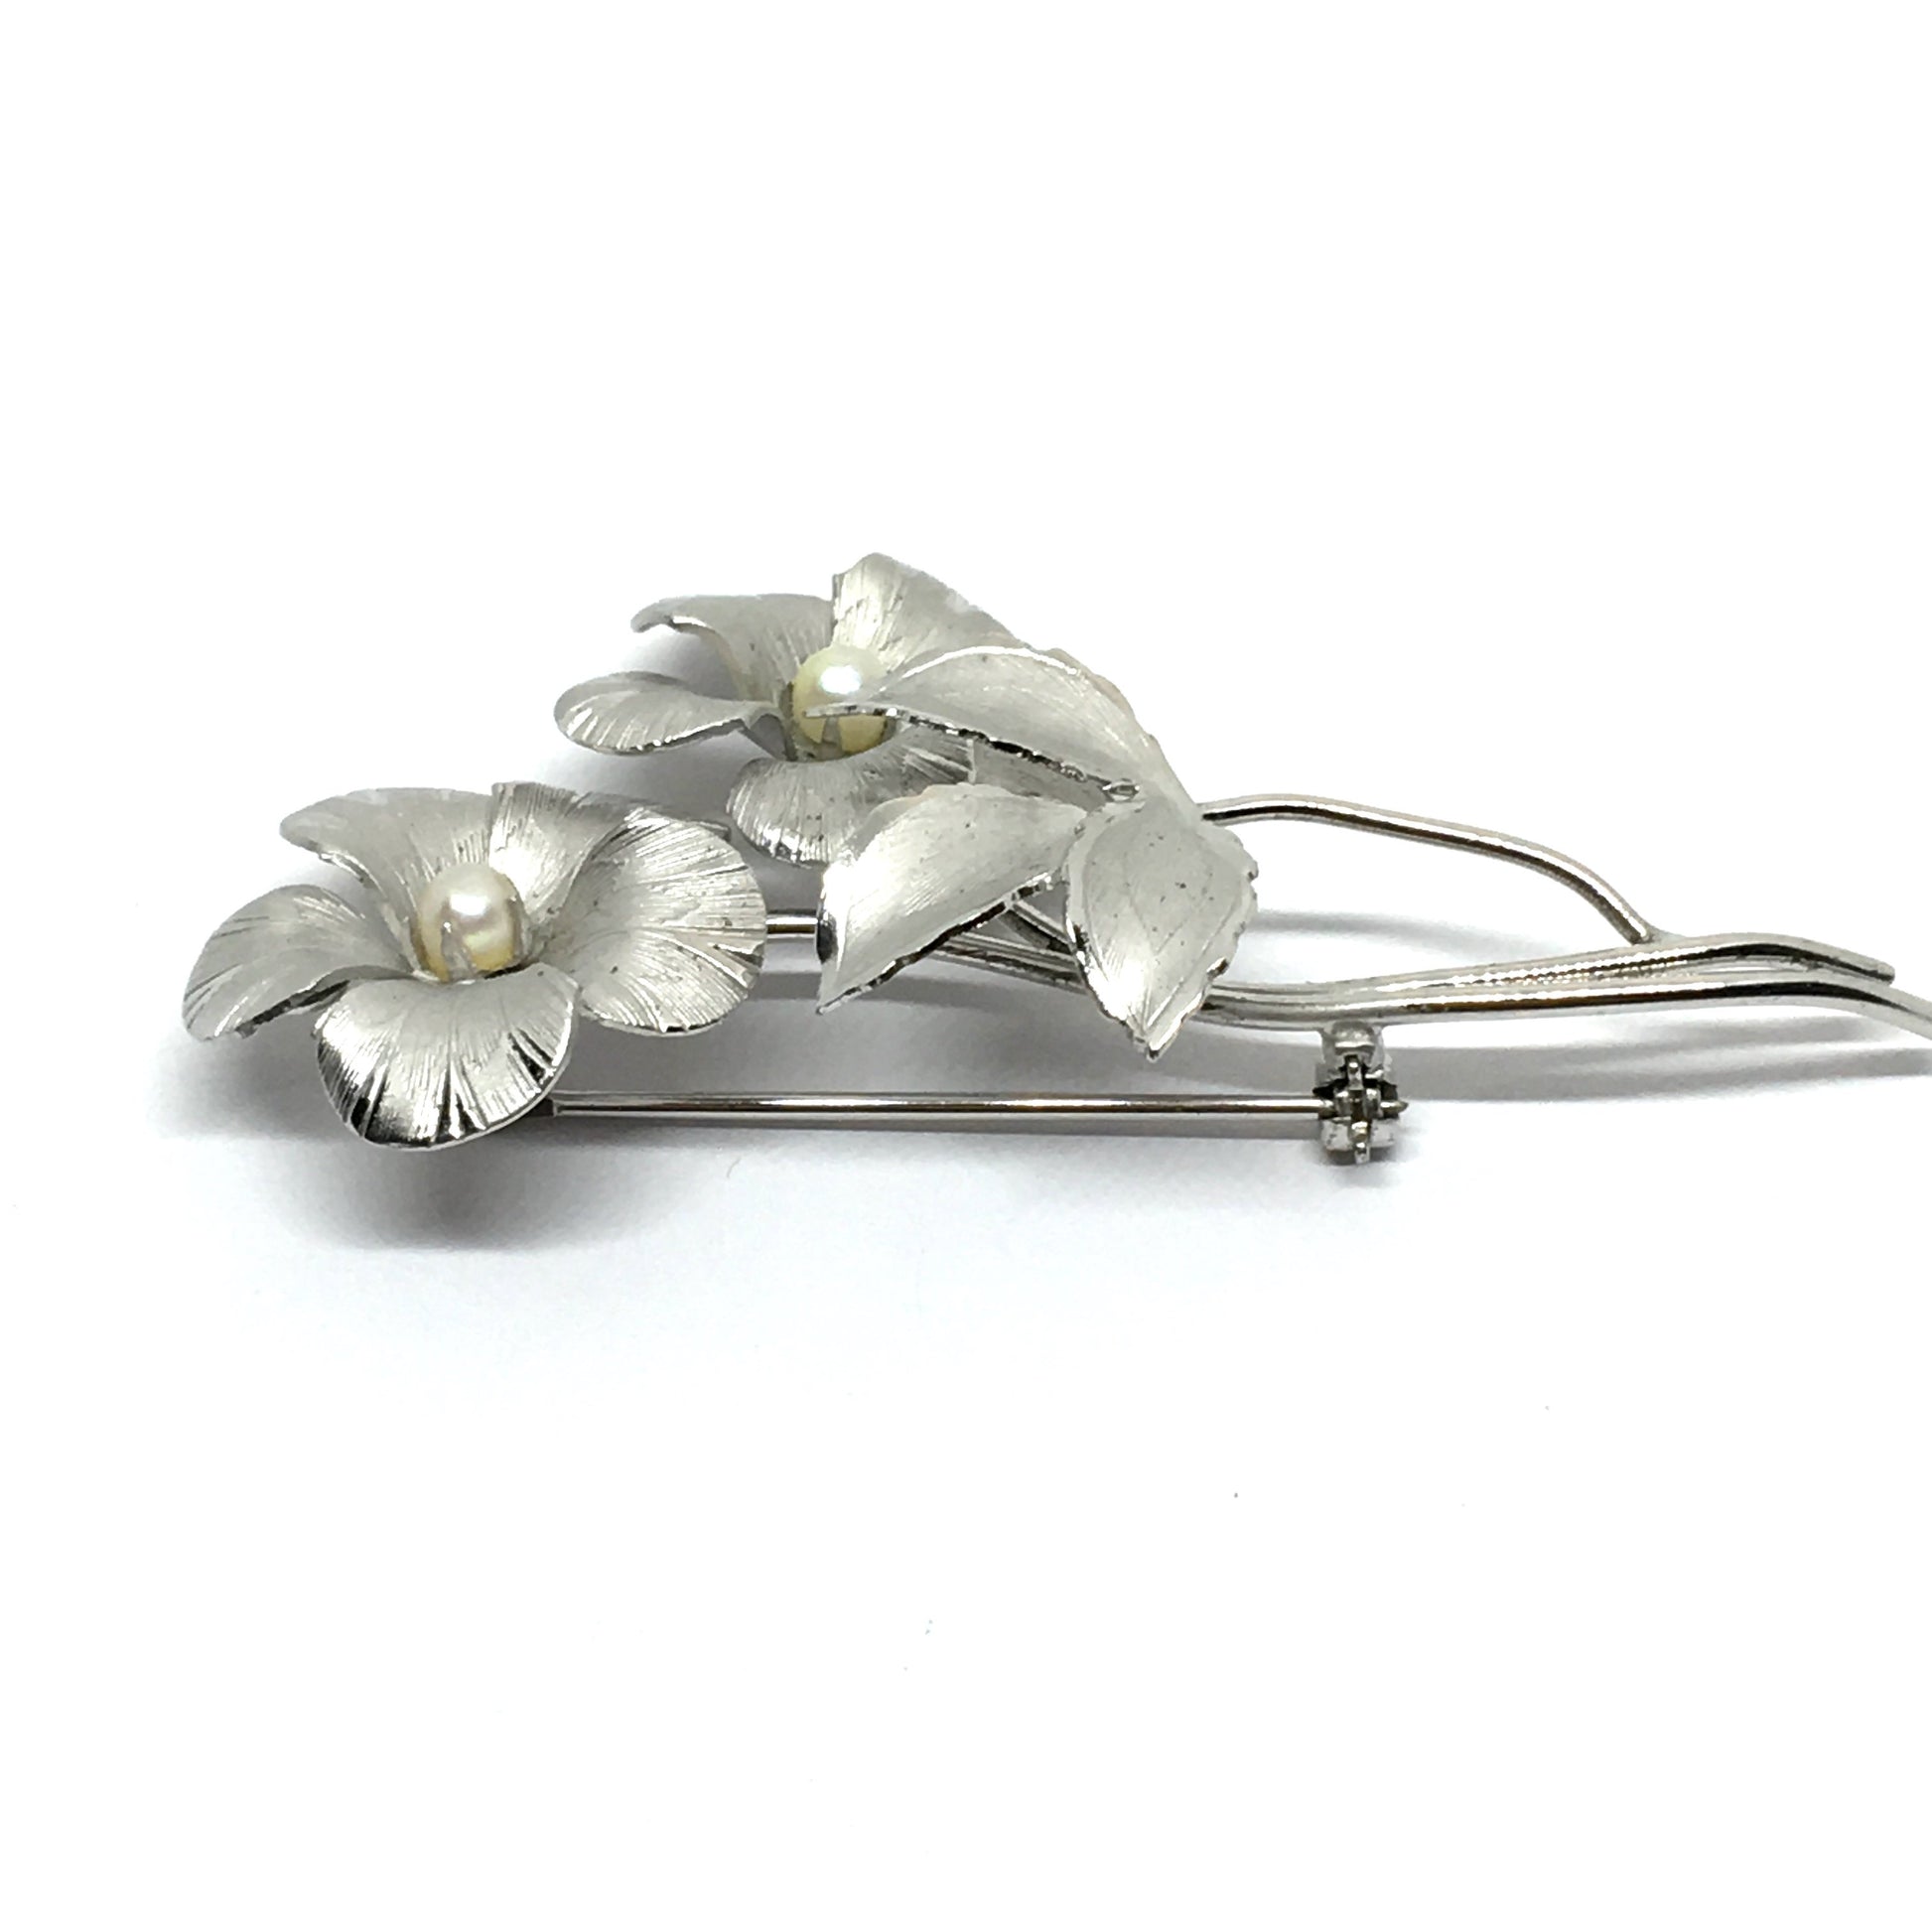 Blingschlingers Jewelry USA Brooches & Lapel Pins | Enchanting Vintage Sterling Silver Dandelion Design Pearl Brooch